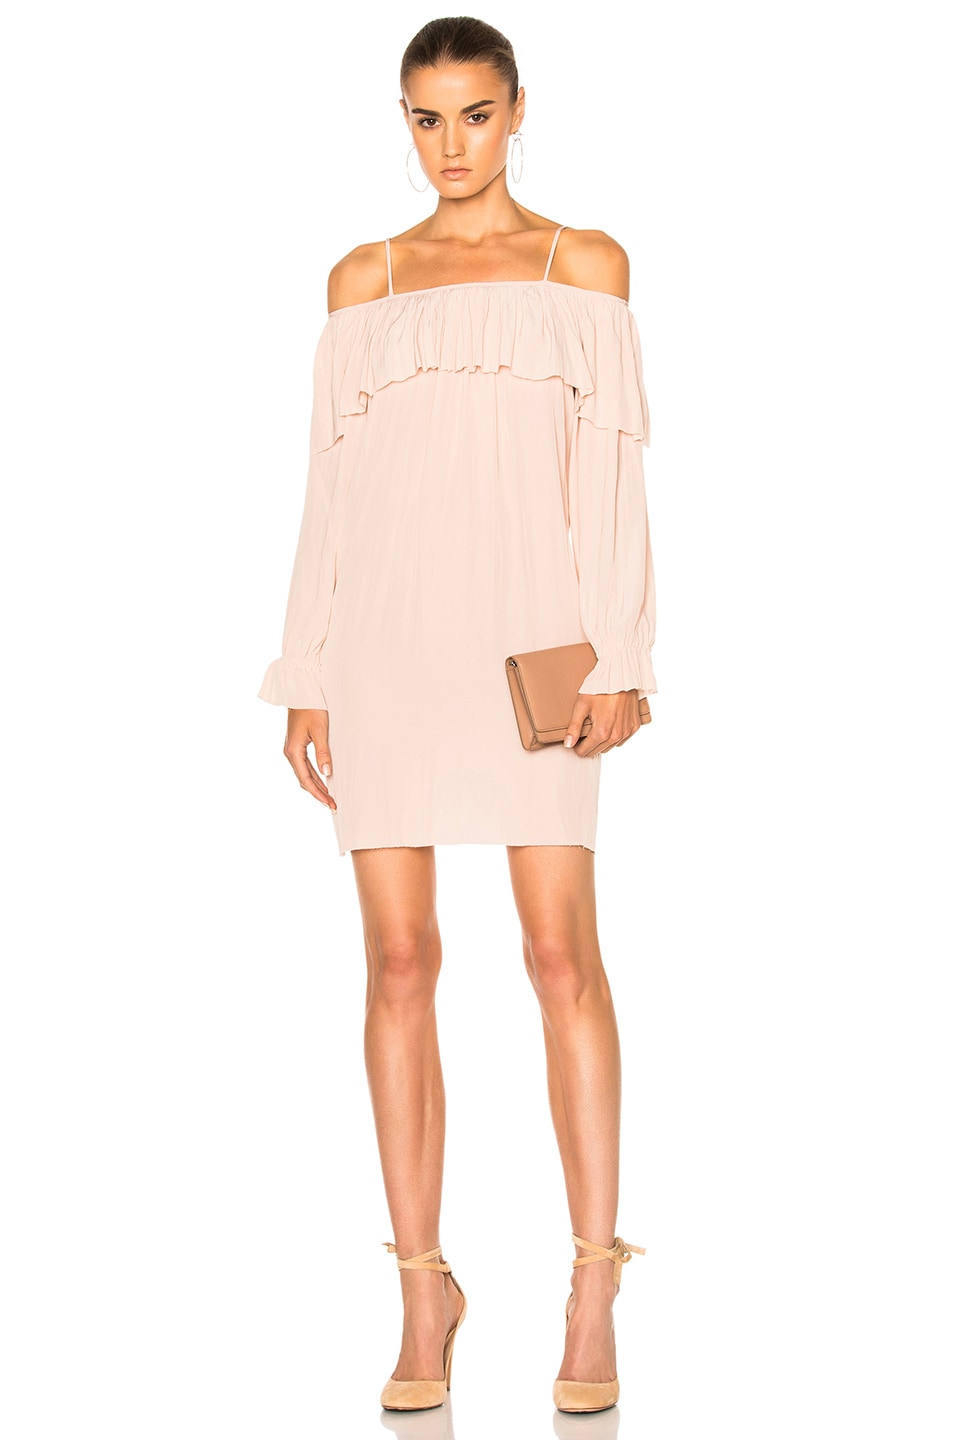 Image 1 of Calvin Rucker for FWRD You Sang To Me Dress in Blush